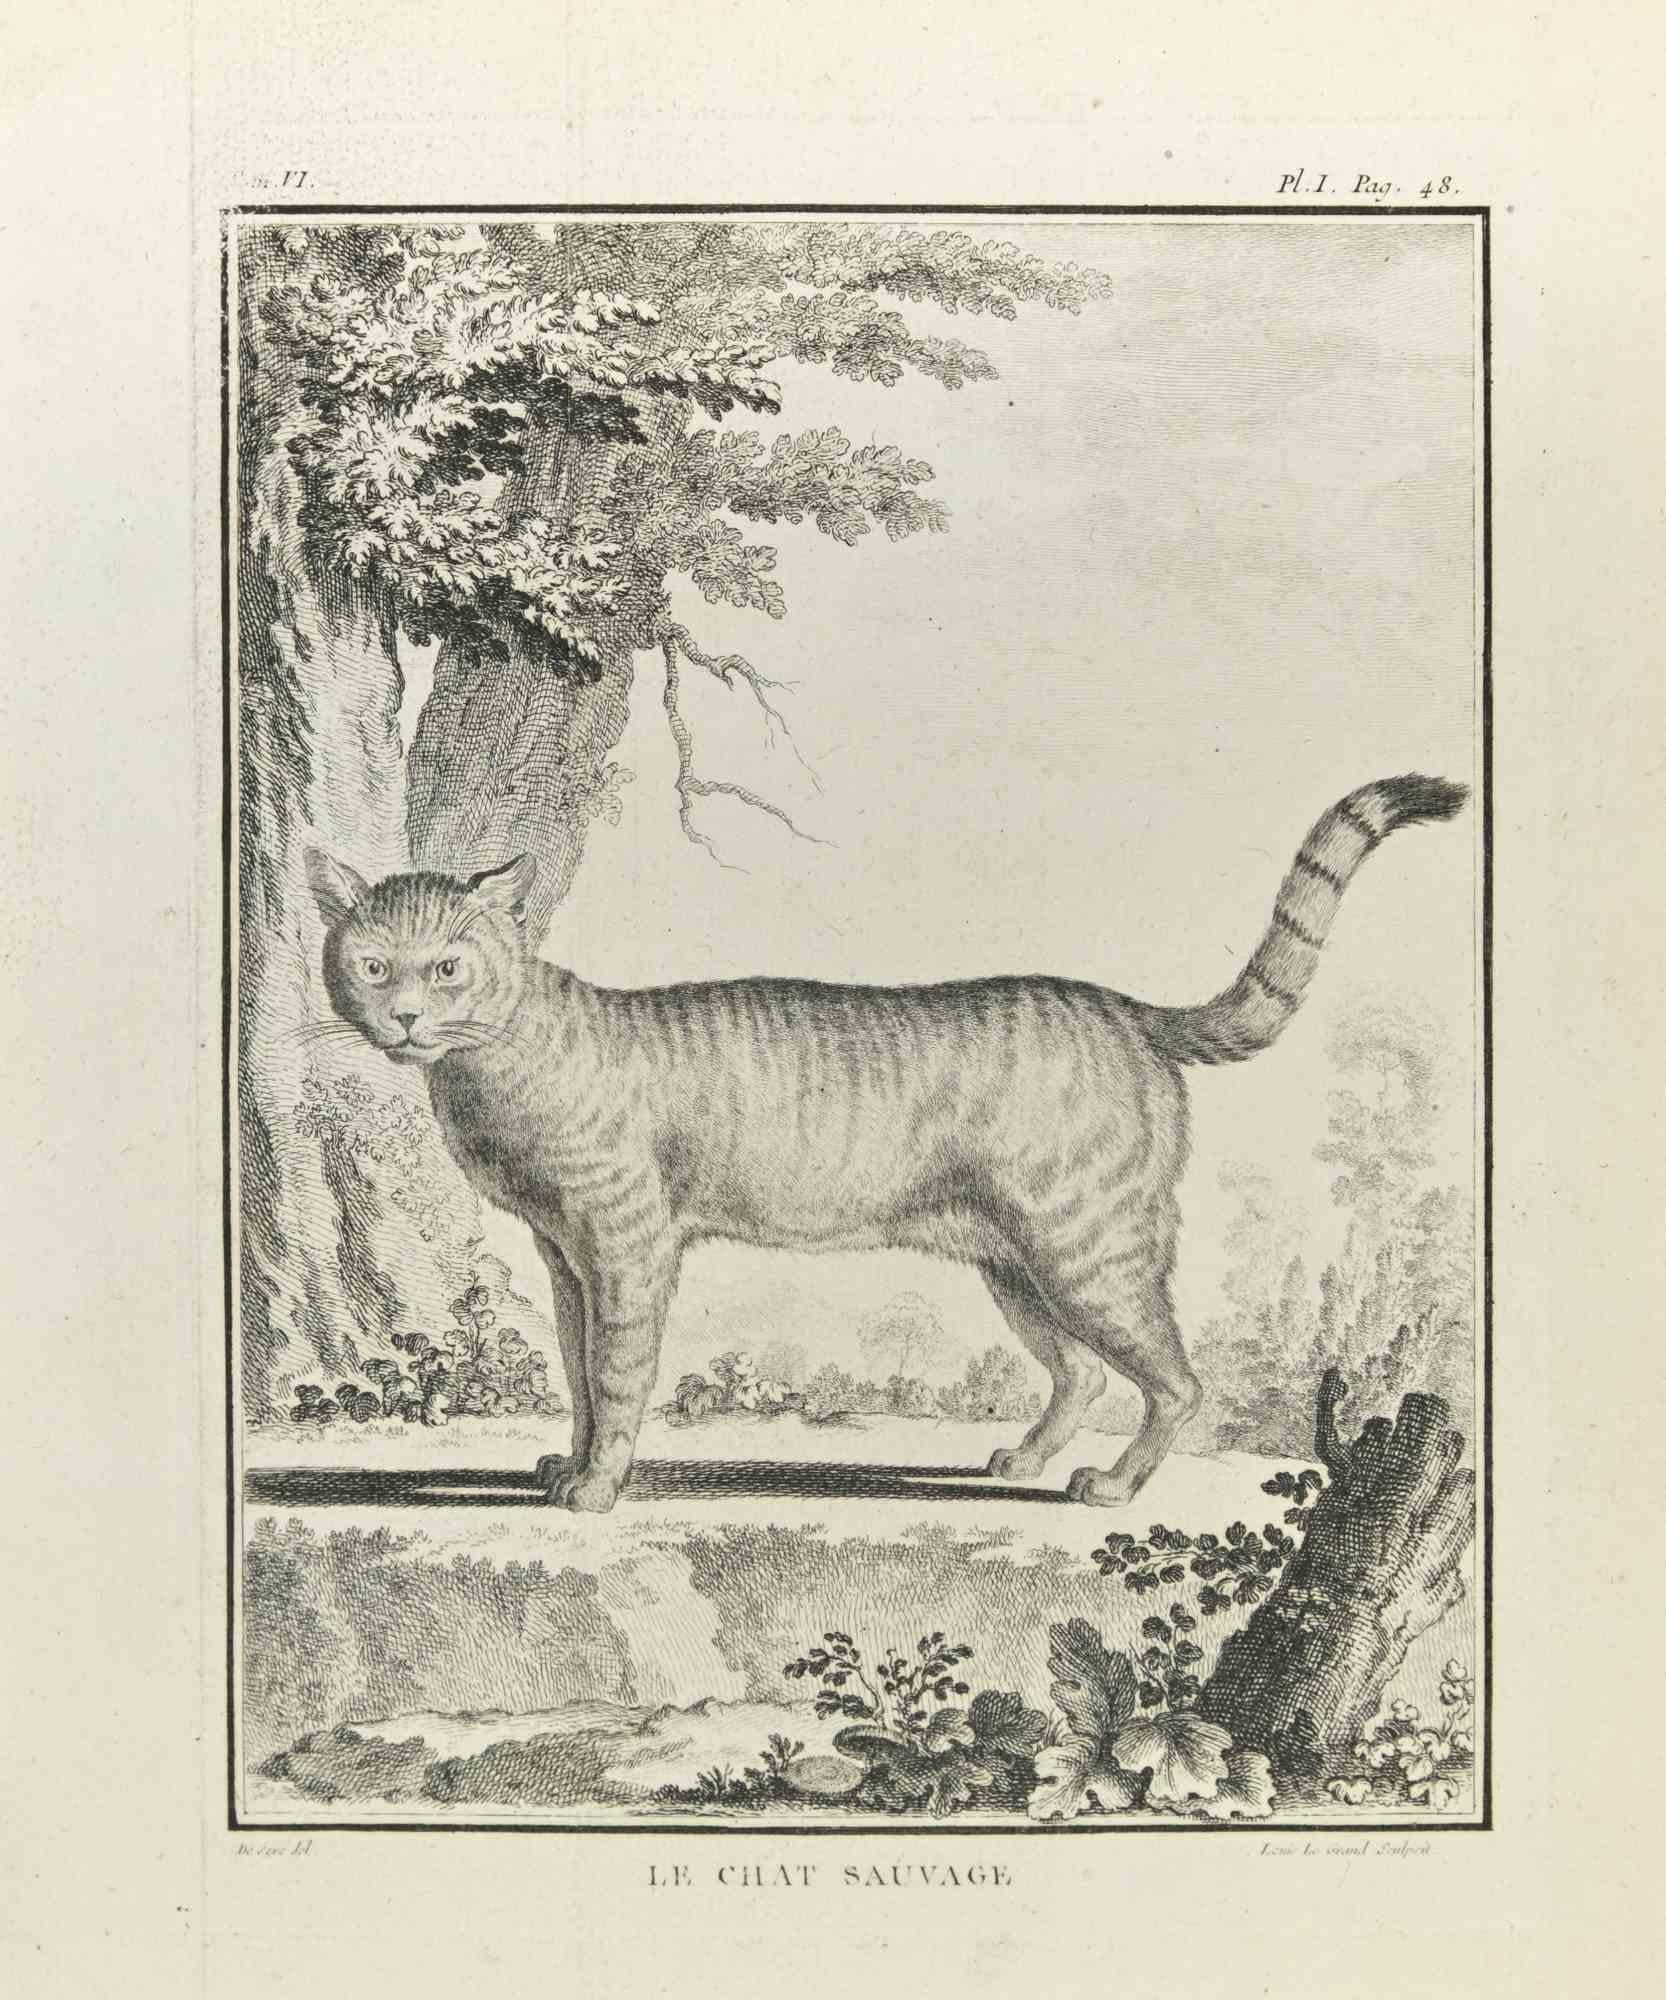 Le Chat Sauvage is an etching realized in 1771 by Louis Legrand (1723-1807).

The Artwork is depicted through confident strokes in aa well balanced composition.

Good conditions.
 

 